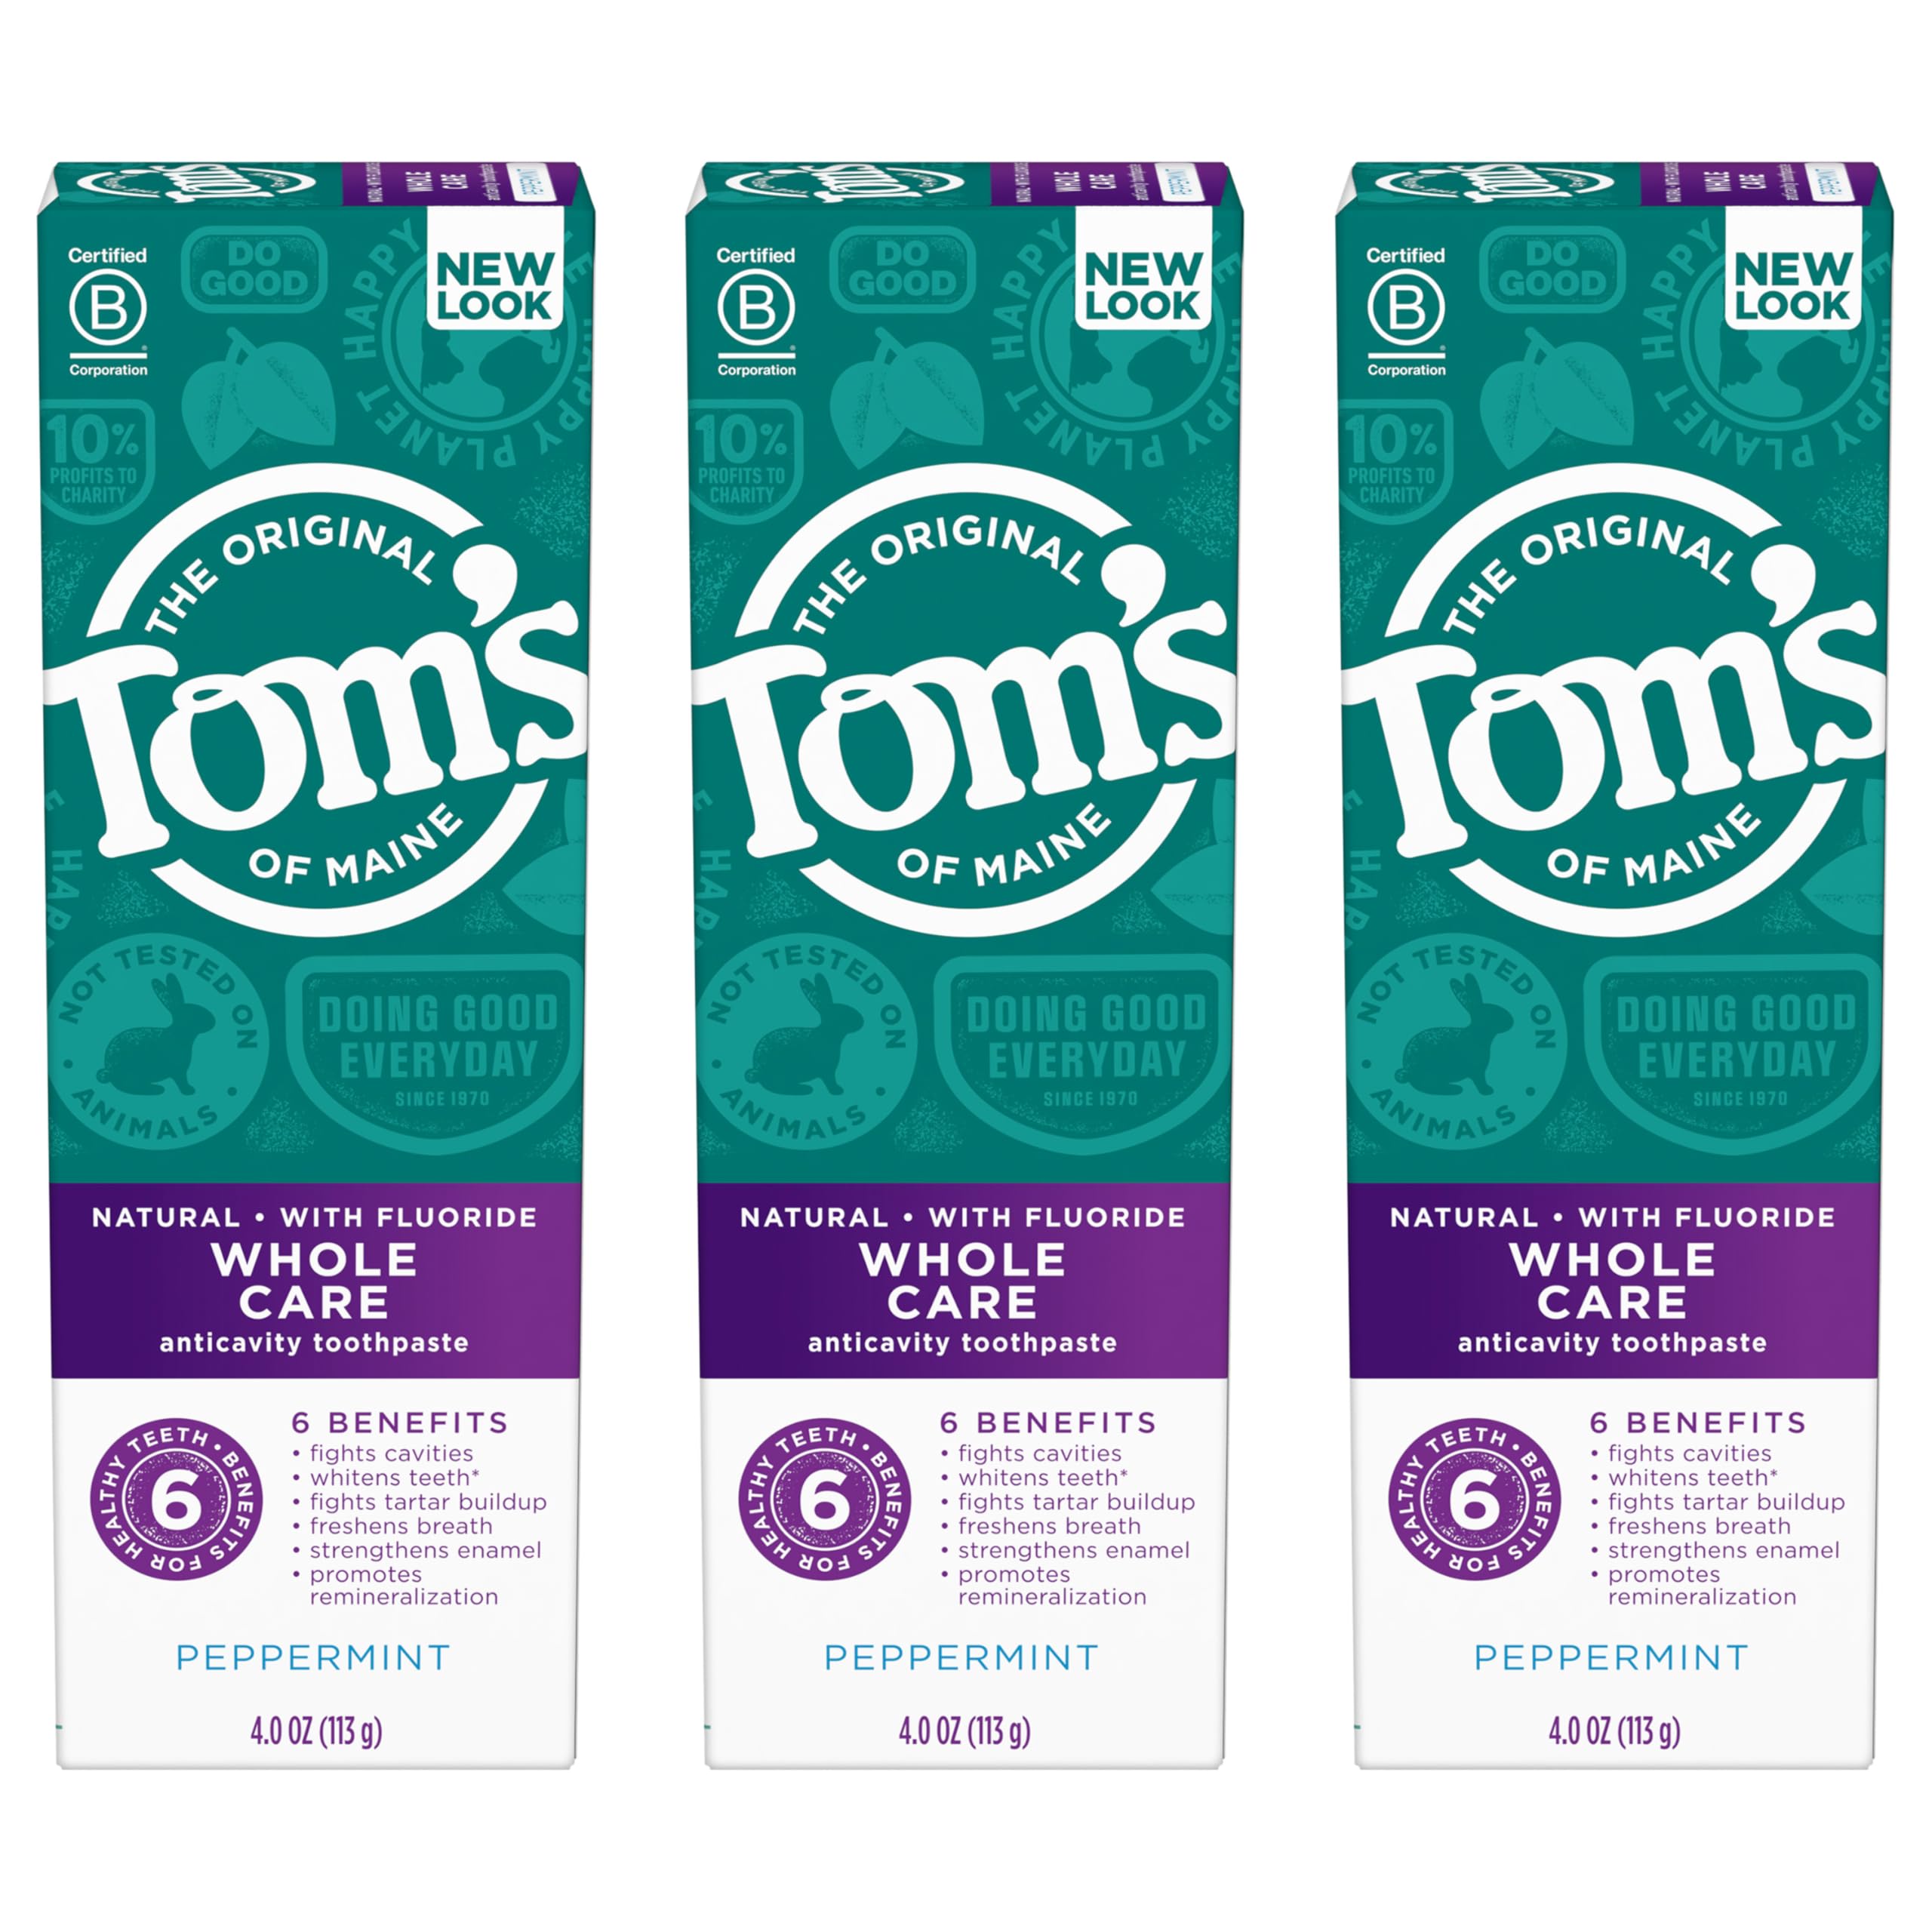 Tom's of Maine Whole Care Natural Toothpaste with Fluoride, Peppermint, 4 oz. 3-Pack [Subscribe & Save] $11.58